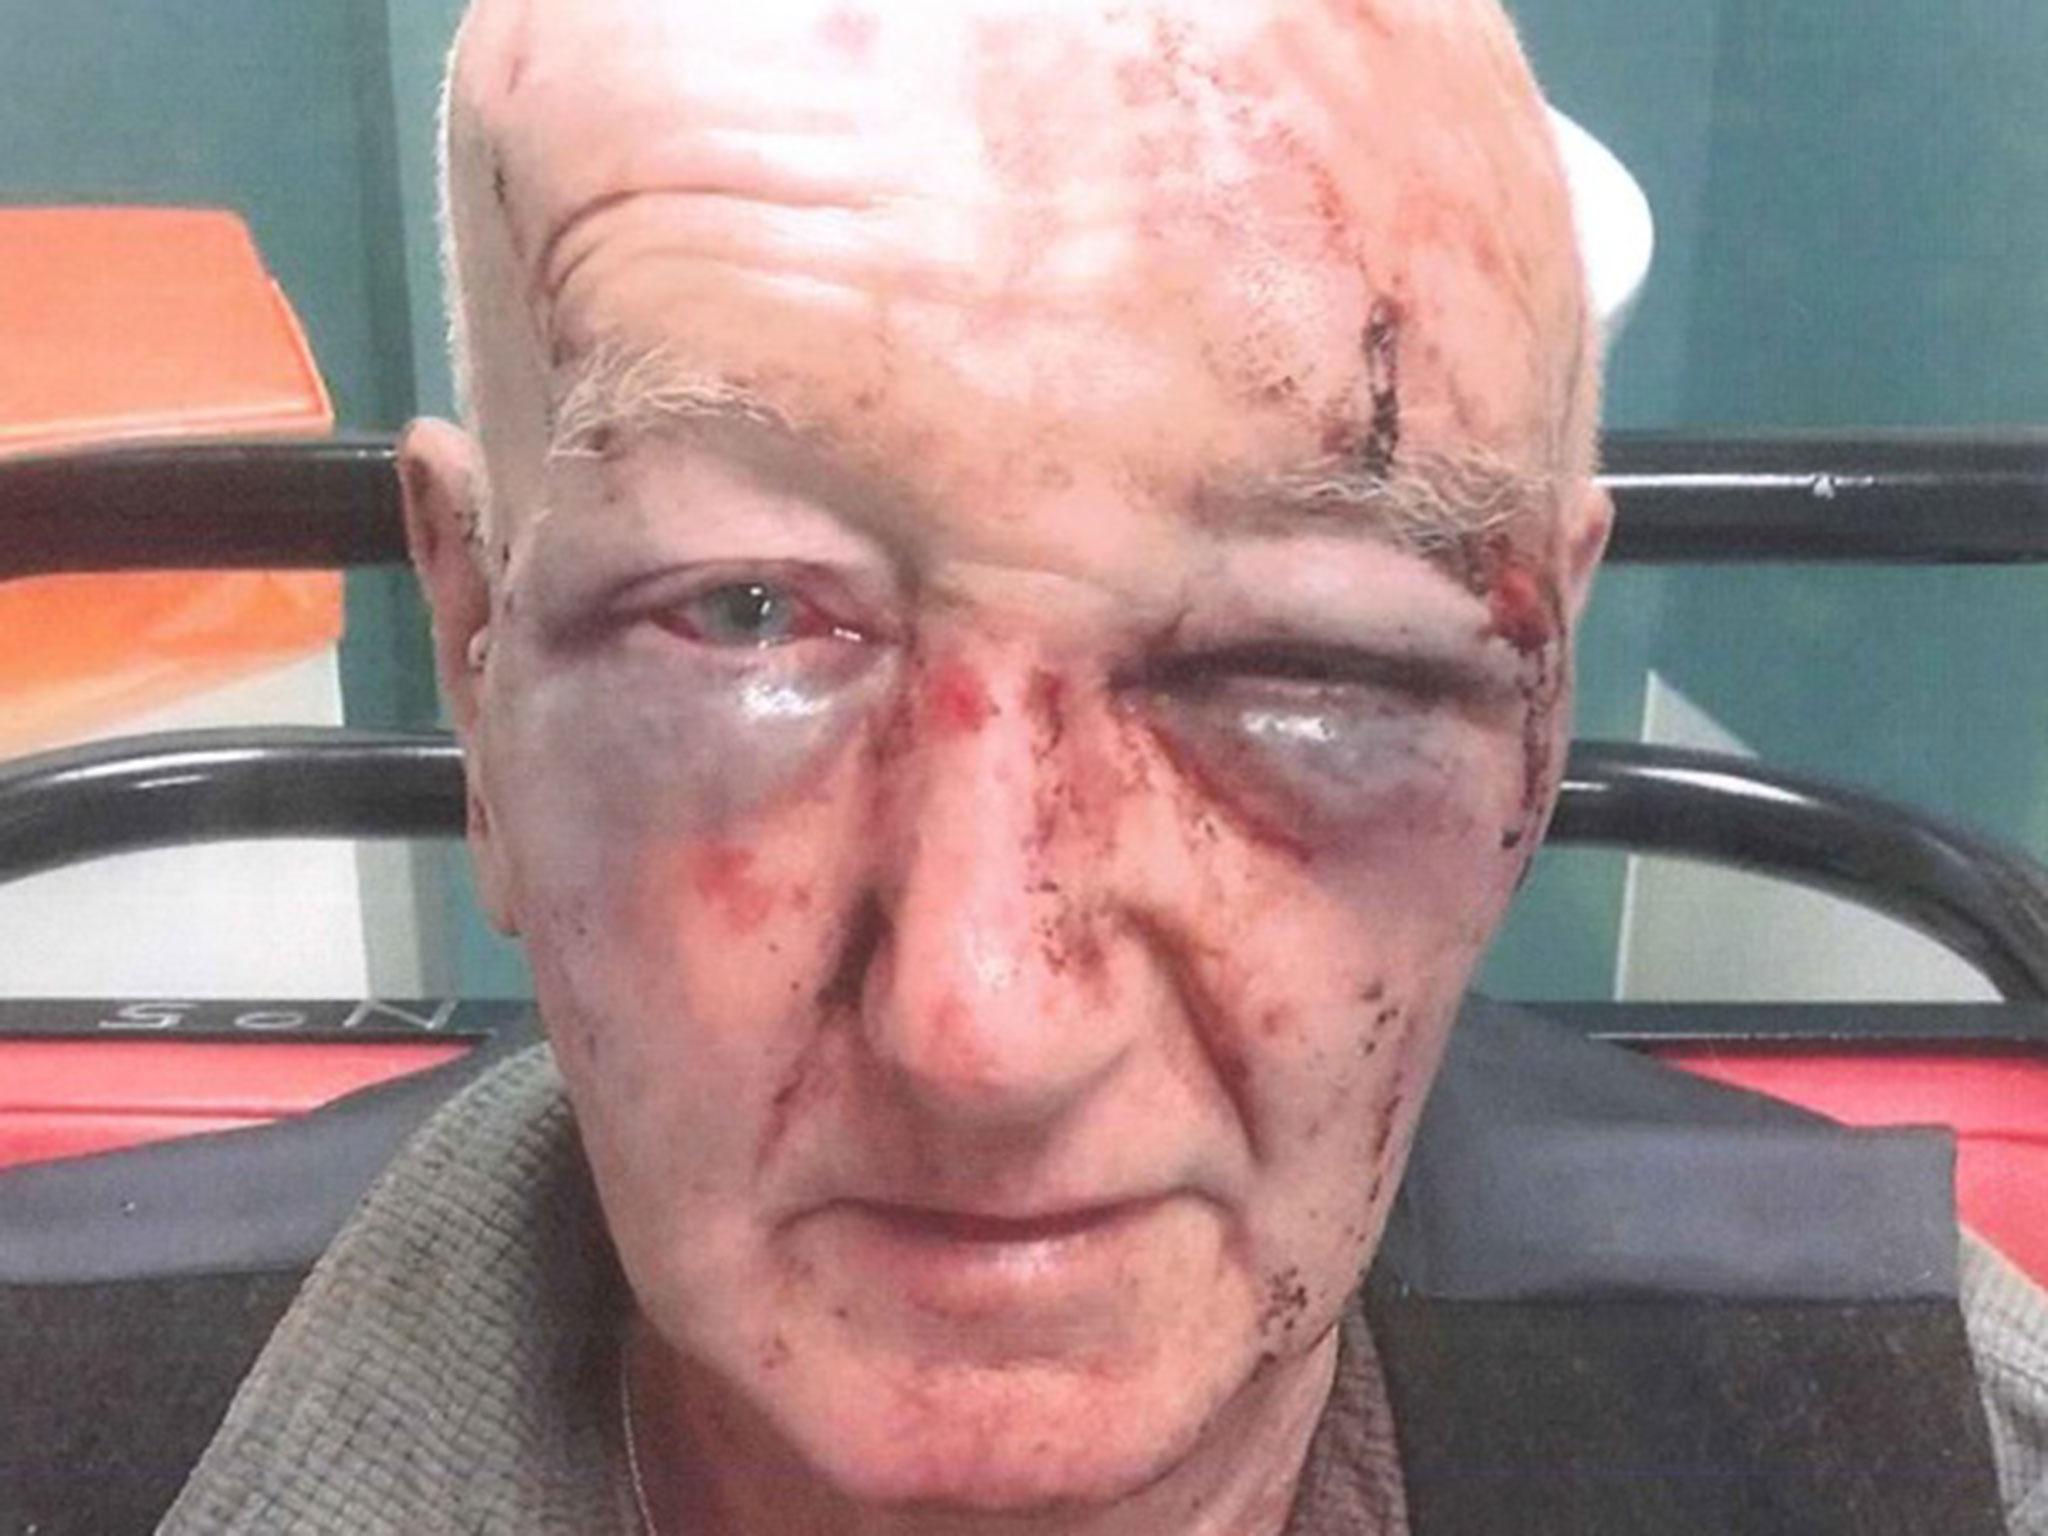 Police released an image of Derek Laidlow, 70, showing the severe bruising on his face in a bid for information to 'bring his attacker to justice'